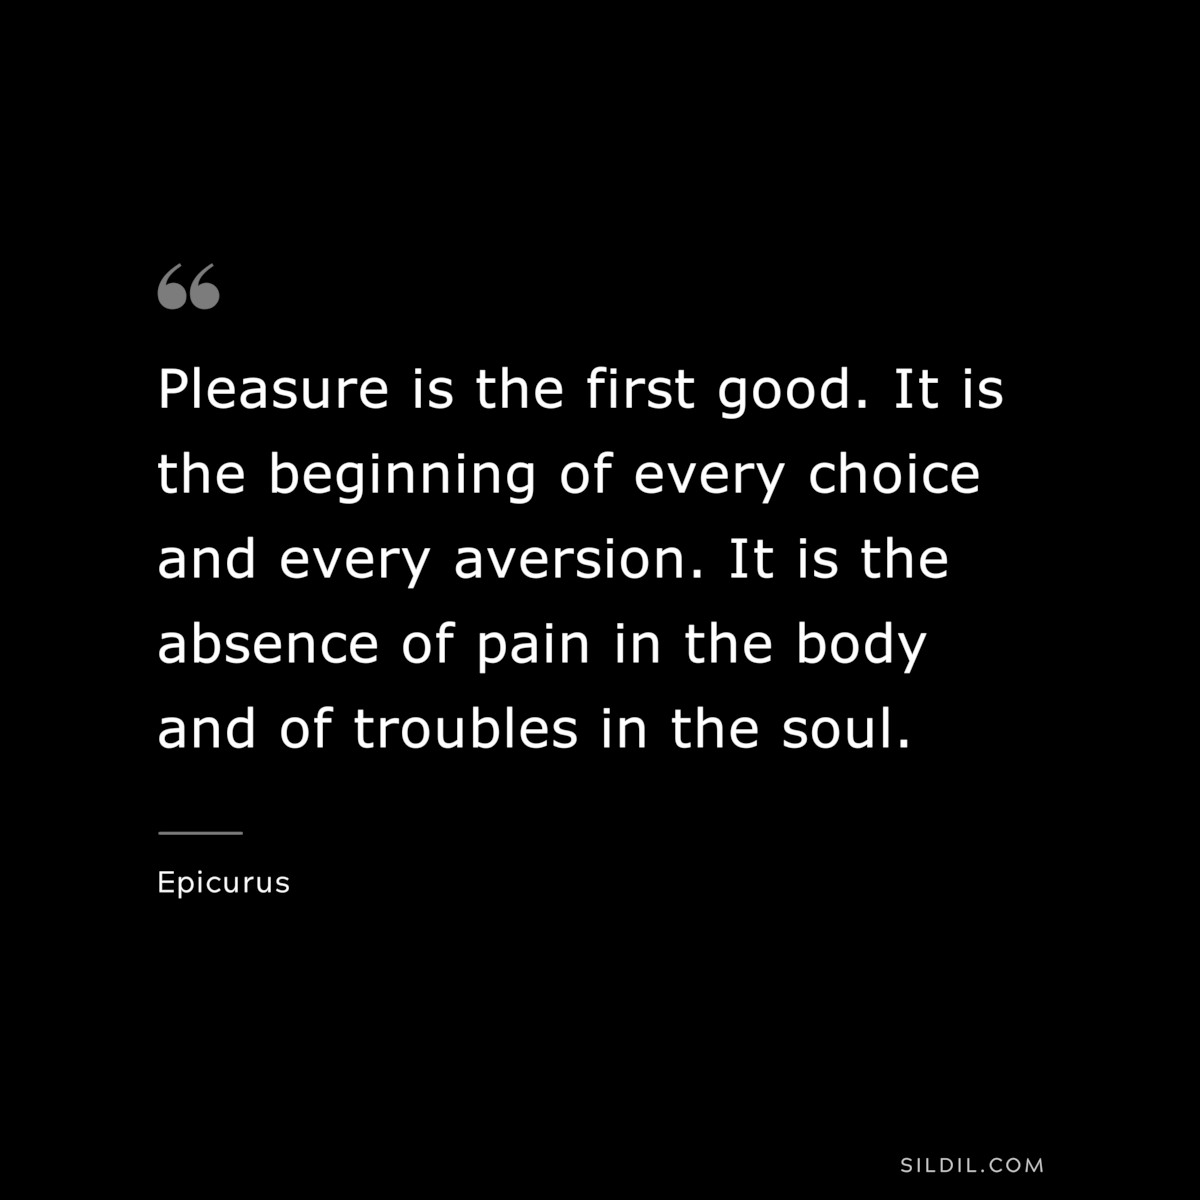 Pleasure is the first good. It is the beginning of every choice and every aversion. It is the absence of pain in the body and of troubles in the soul. — Epicurus